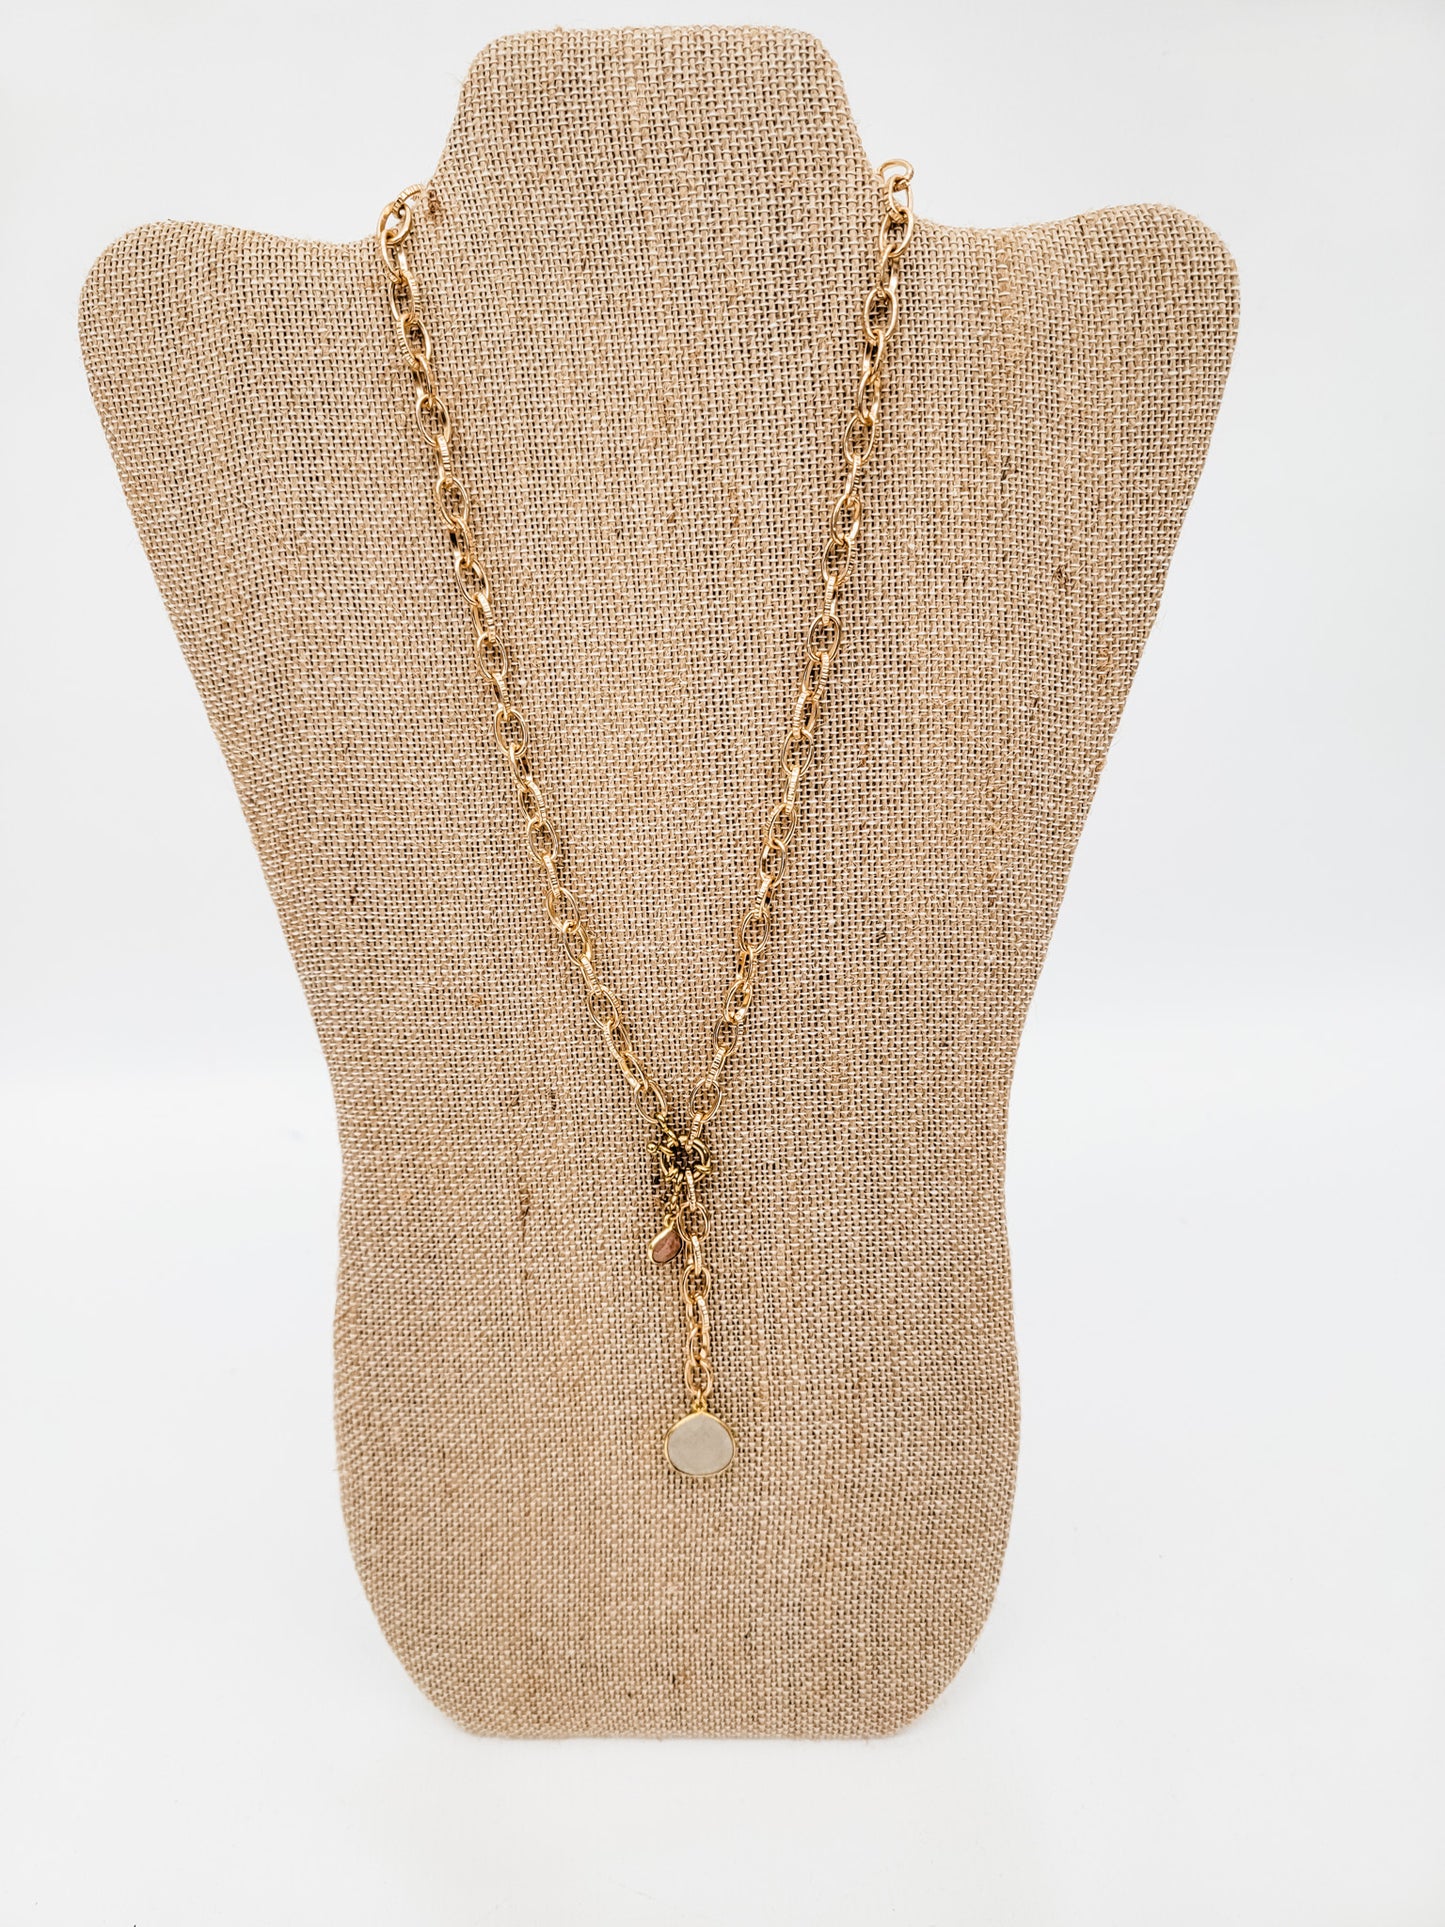 Gold Chain Necklace with Stone Pendant - Variety